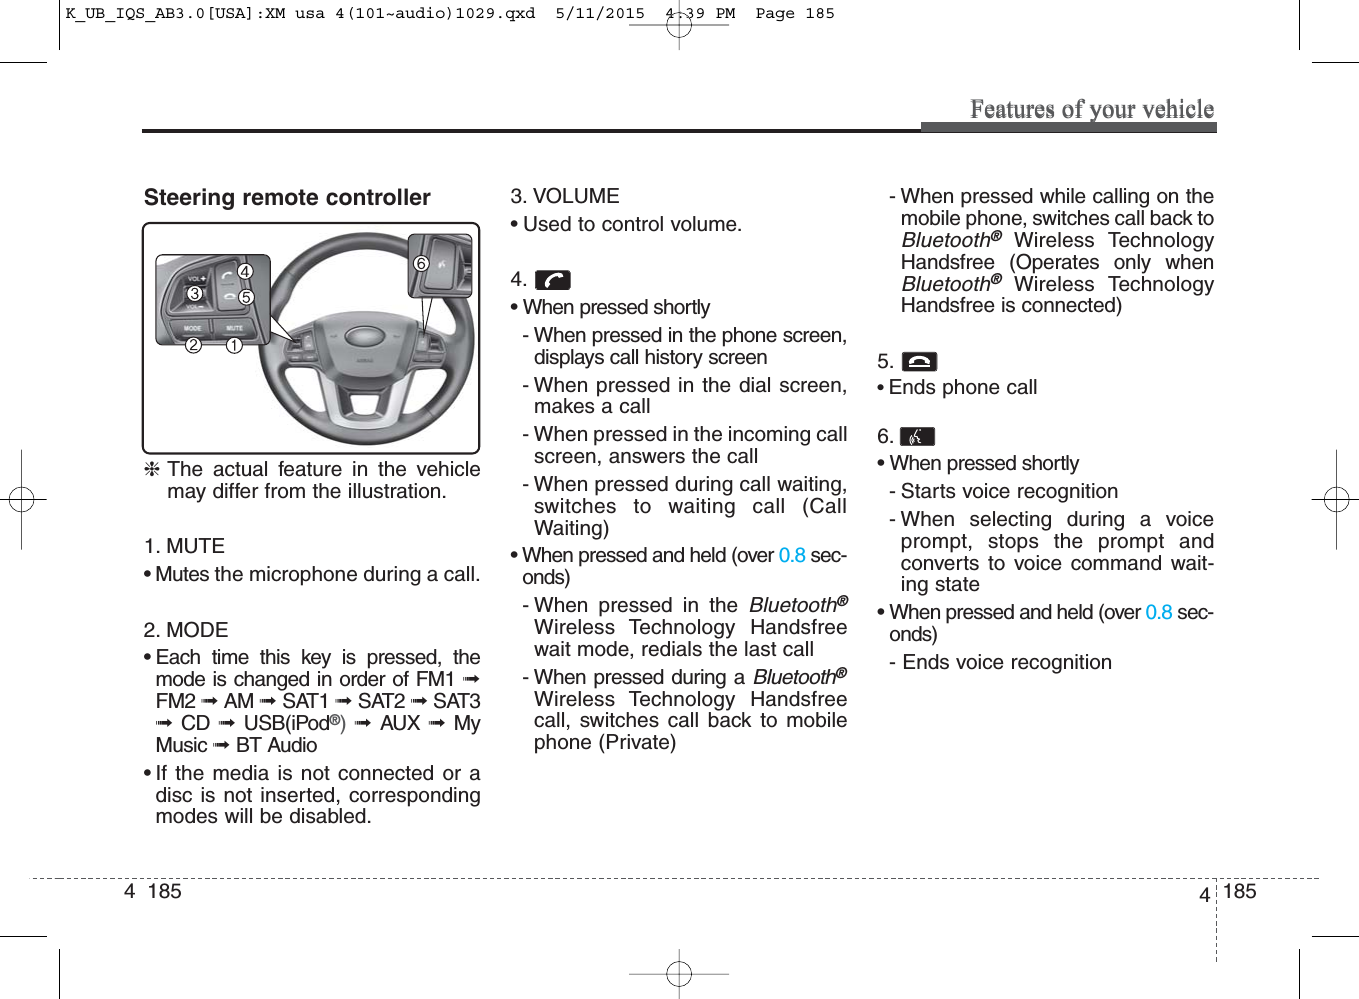 4  185Features of your vehicleSteering remote controller❈The actual feature in the vehiclemay differ from the illustration.1. MUTE• Mutes the microphone during a call.2. MODE• Each time this key is pressed, themode is changed in order of FM1 ➟FM2 ➟ AM ➟ SAT1 ➟ SAT2 ➟SAT3➟  CD  ➟  USB(iPod®)  ➟  AUX  ➟  MyMusic ➟ BT Audio• If the media is not connected or adisc is not inserted, correspondingmodes will be disabled.3. VOLUME• Used to control volume.4. • When pressed shortly- When pressed in the phone screen,displays call history screen- When pressed in the dial screen,makes a call- When pressed in the incoming callscreen, answers the call- When pressed during call waiting,switches to    waiting call (CallWaiting)• When pressed and held (over 0.8 sec-onds)- When pressed in the Bluetooth®Wireless Technology Handsfreewait mode, redials the last call- When pressed during a Bluetooth®Wireless Technology Handsfreecall, switches call back to mobilephone (Private)- When pressed while calling on themobile phone, switches call back toBluetooth®Wireless TechnologyHandsfree (Operates only whenBluetooth®Wireless TechnologyHandsfree is connected)5. • Ends phone call6. • When pressed shortly- Starts voice recognition- When selecting during a voiceprompt, stops the prompt andconverts to voice command wait-ing state• When pressed and held (over 0.8 sec-onds)- Ends voice recognition1854Features of your vehicleK_UB_IQS_AB3.0[USA]:XM usa 4(101~audio)1029.qxd  5/11/2015  4:39 PM  Page 185